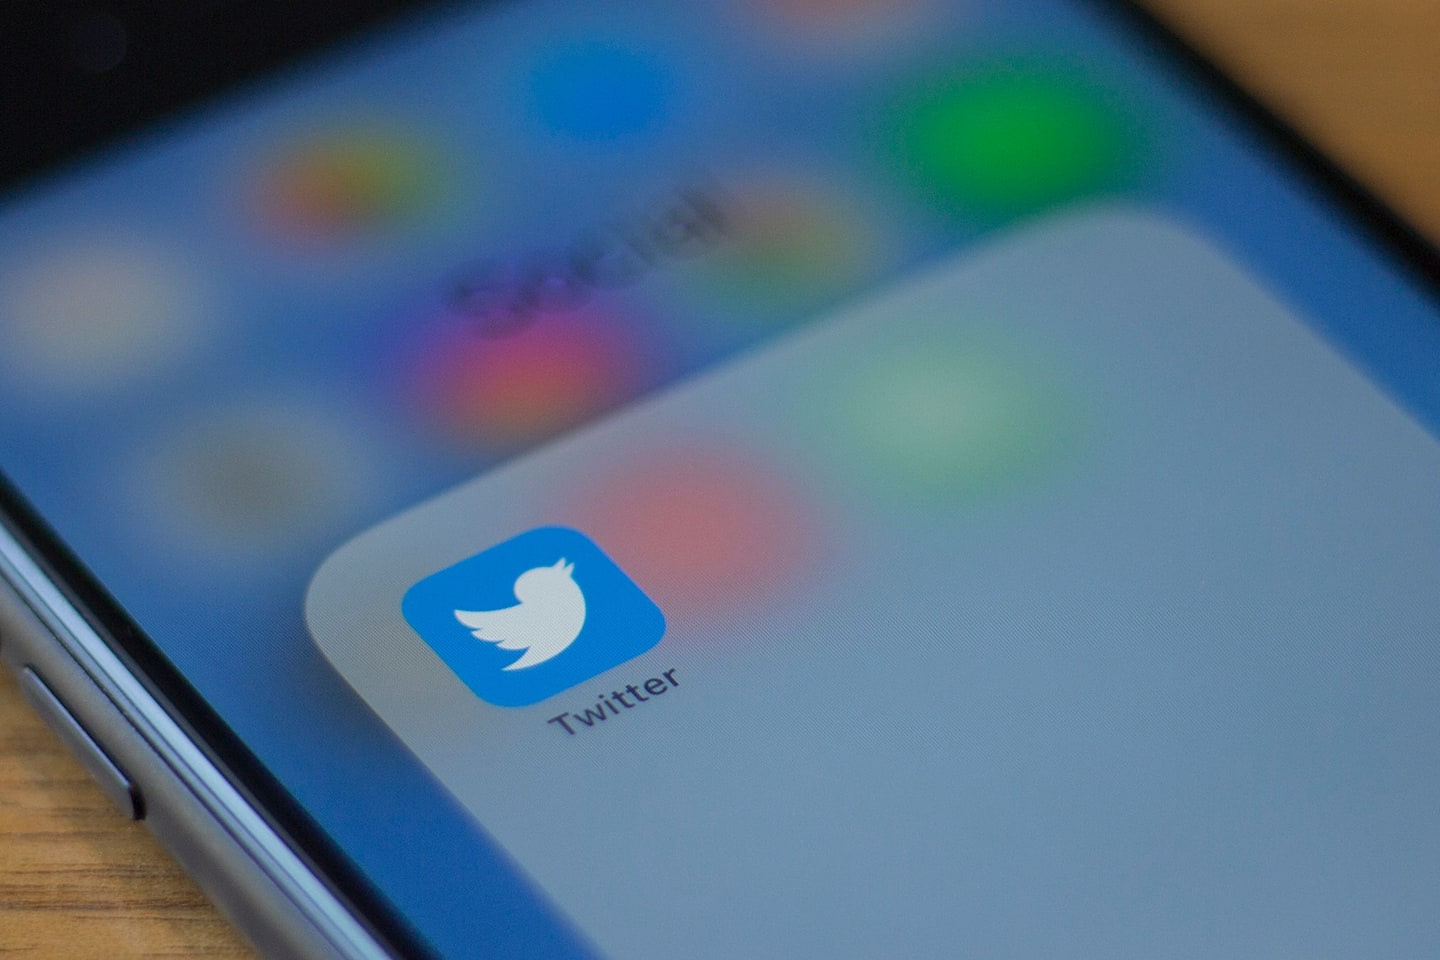 Emails linked to 200 million Twitter accounts published by hackers